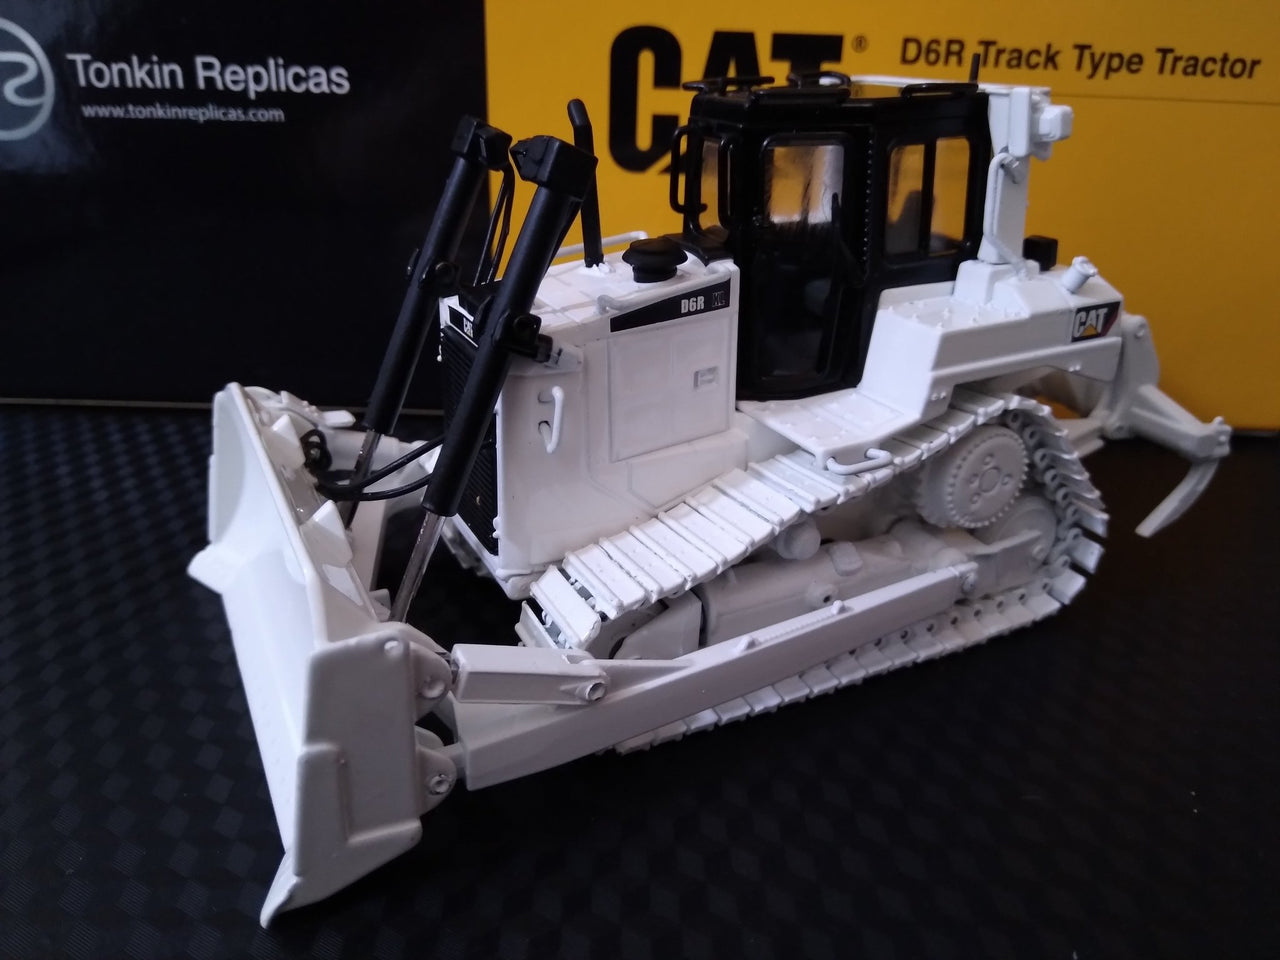 60001-01 Caterpillar D6R Crawler Tractor Scale 1:50 (Discontinued Model)